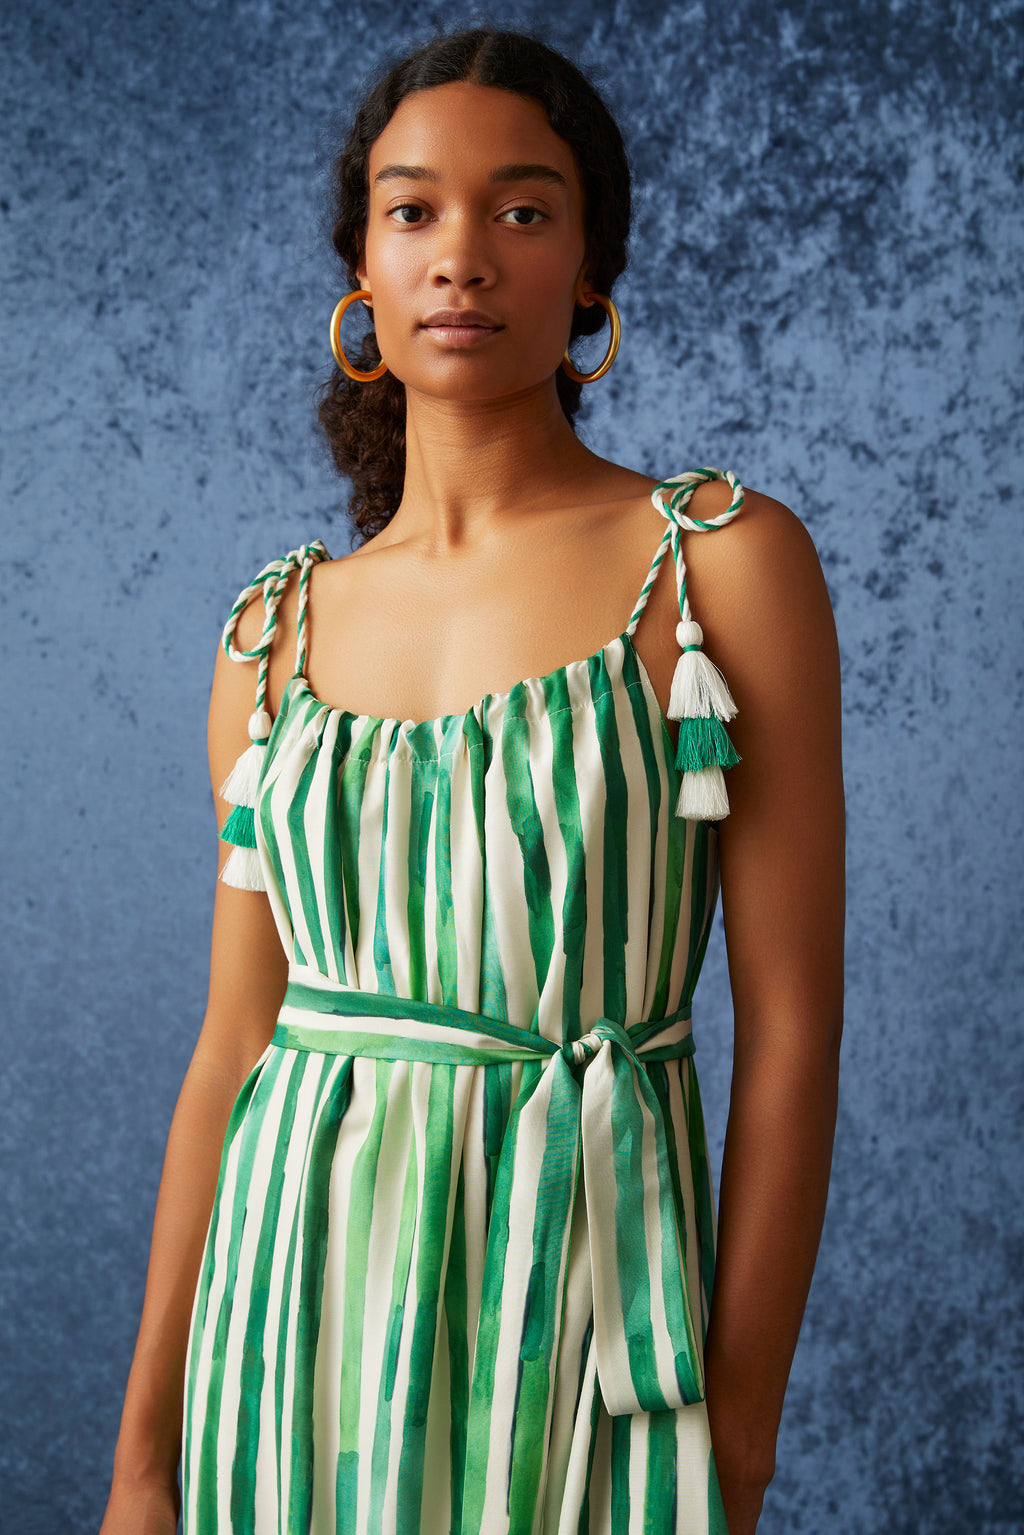 Maxi dress in a green and white vertical striped pattern with adjustable ties at the shoulder